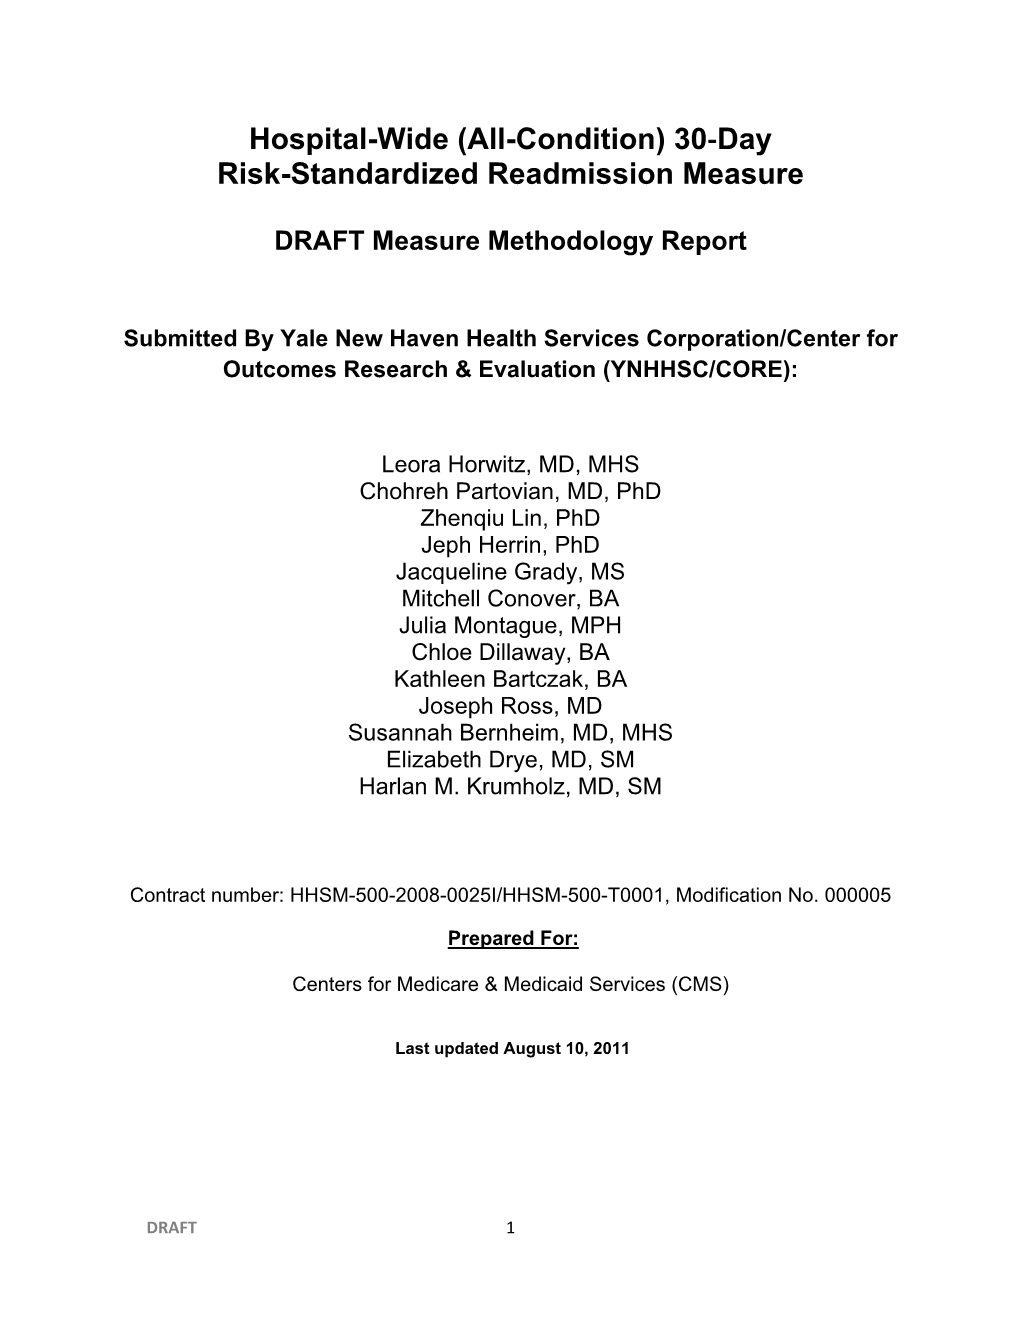 Medicare Hospital-Wide (All-Condition) 30‐Day Risk-Standardized Readmission Measure